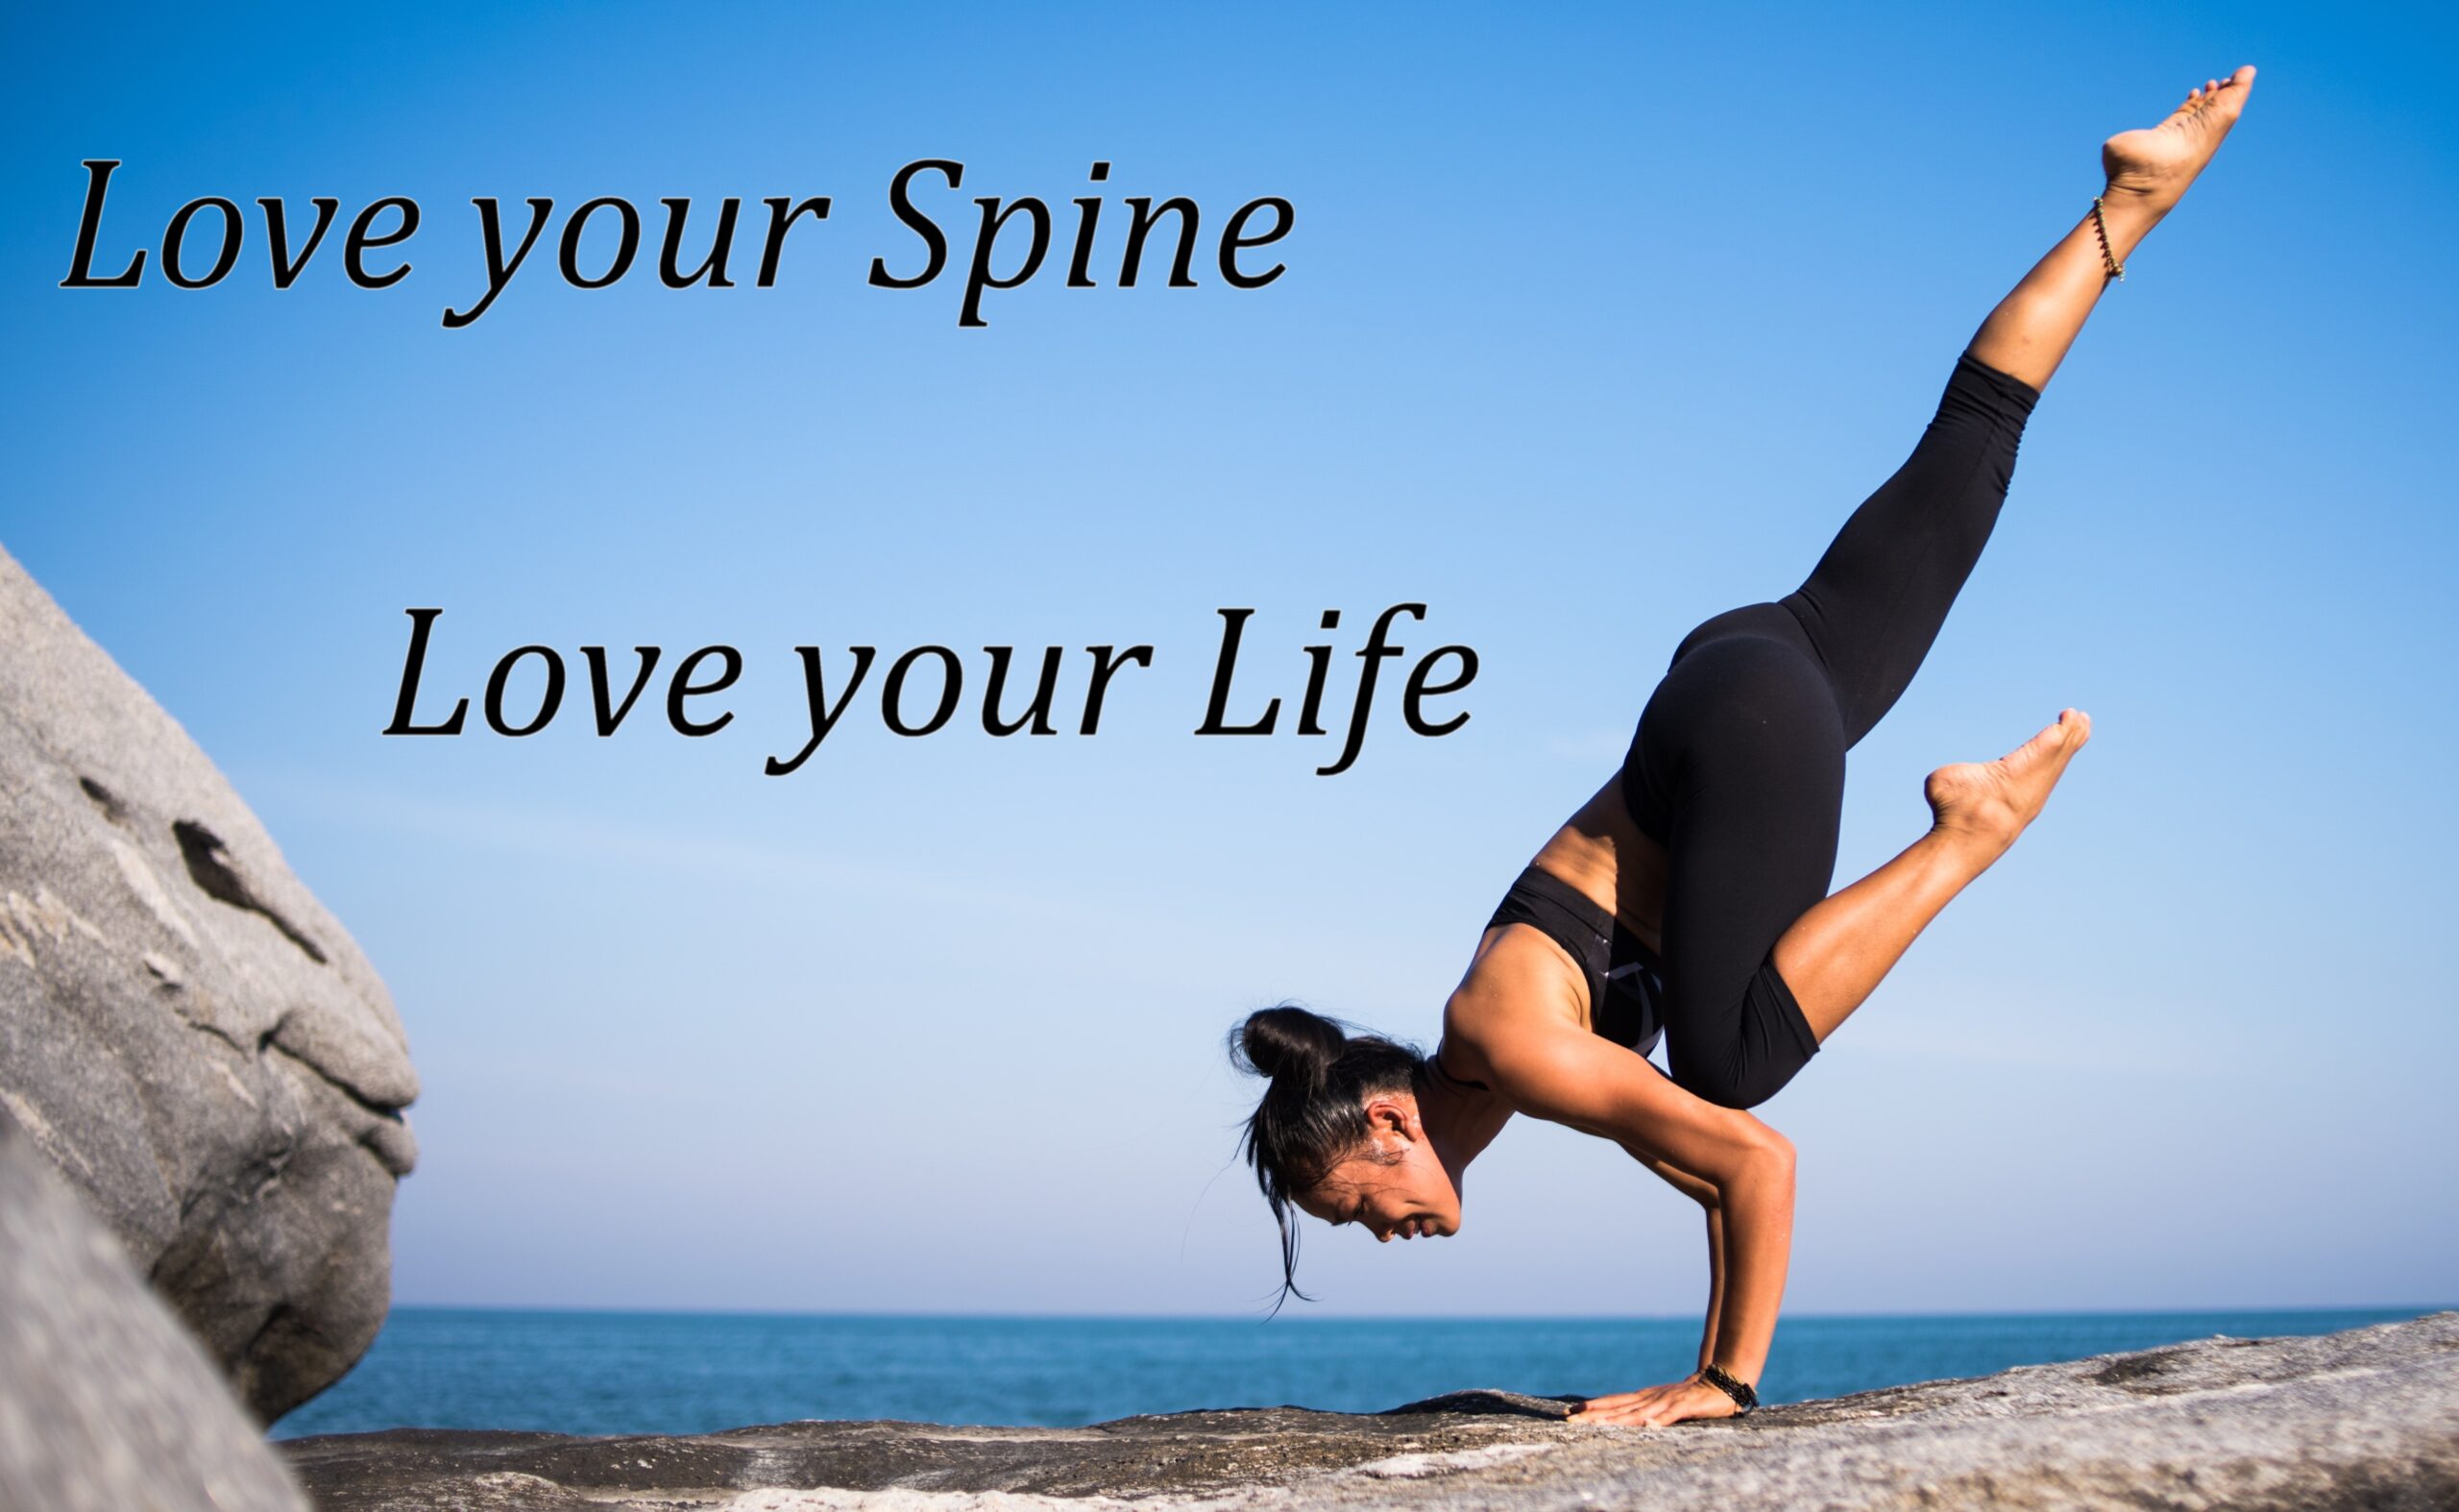 Message : love your spine, love your life